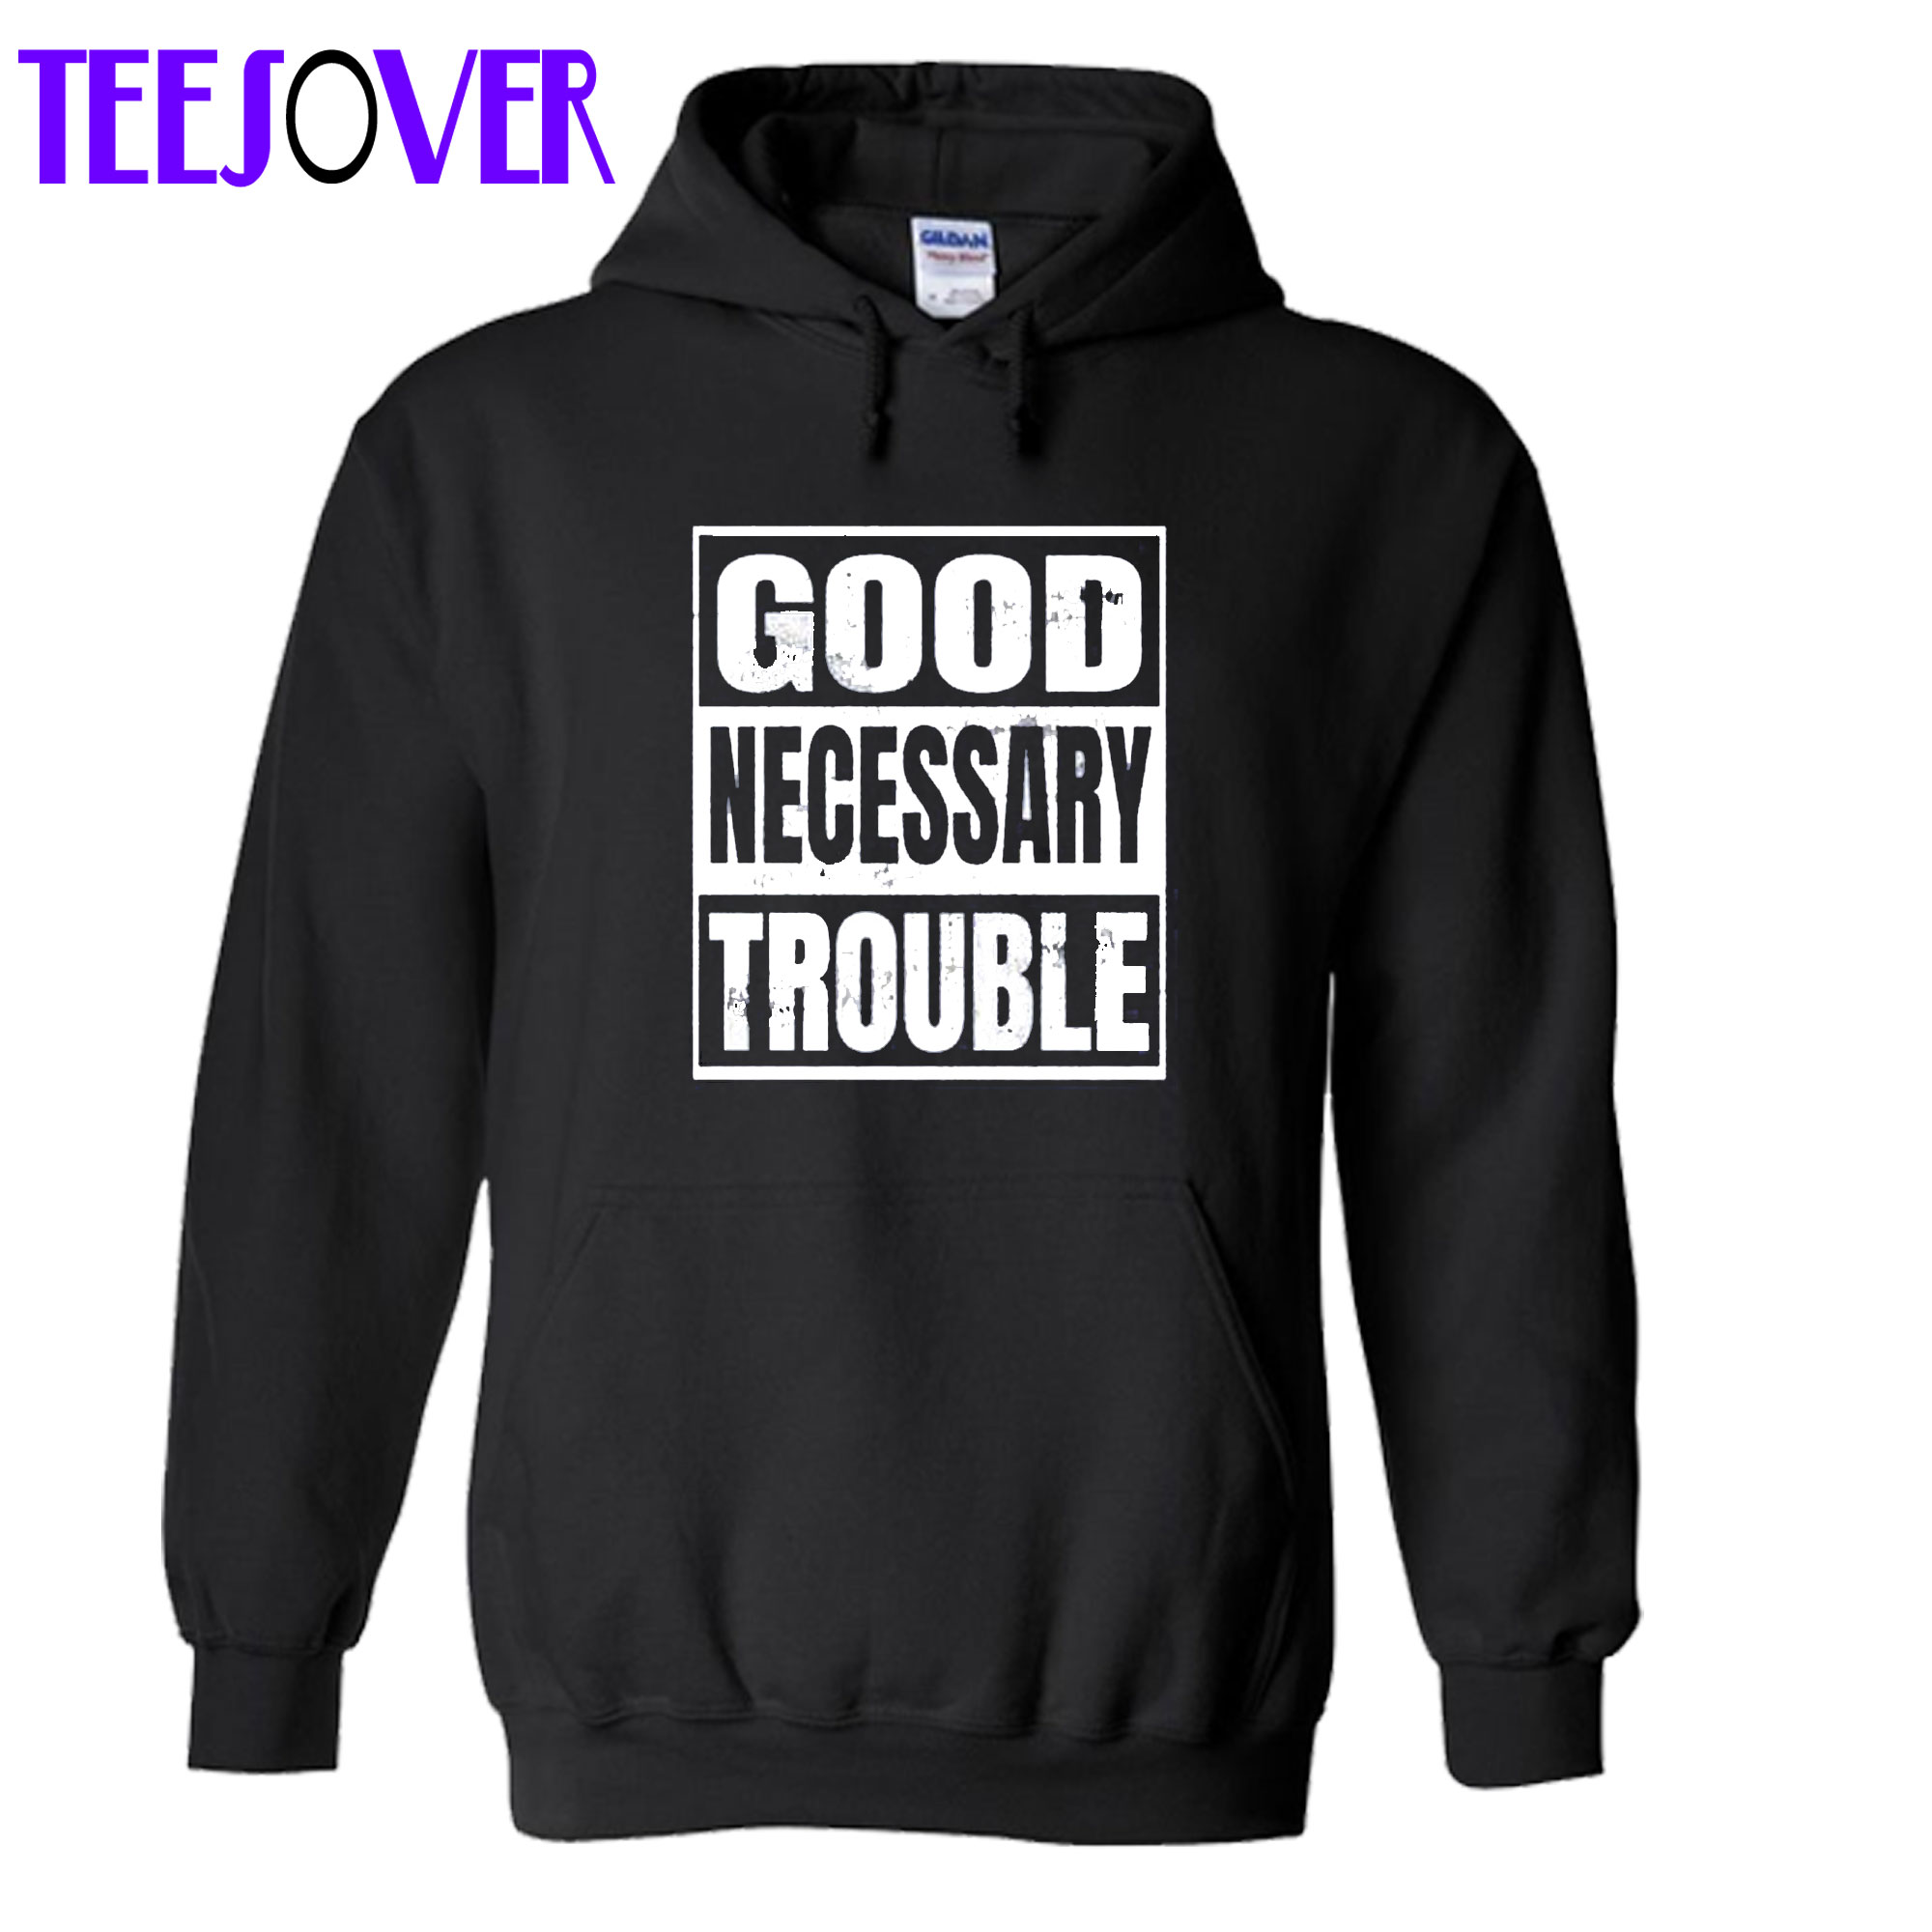 Good Negessary Trouble Hoodie